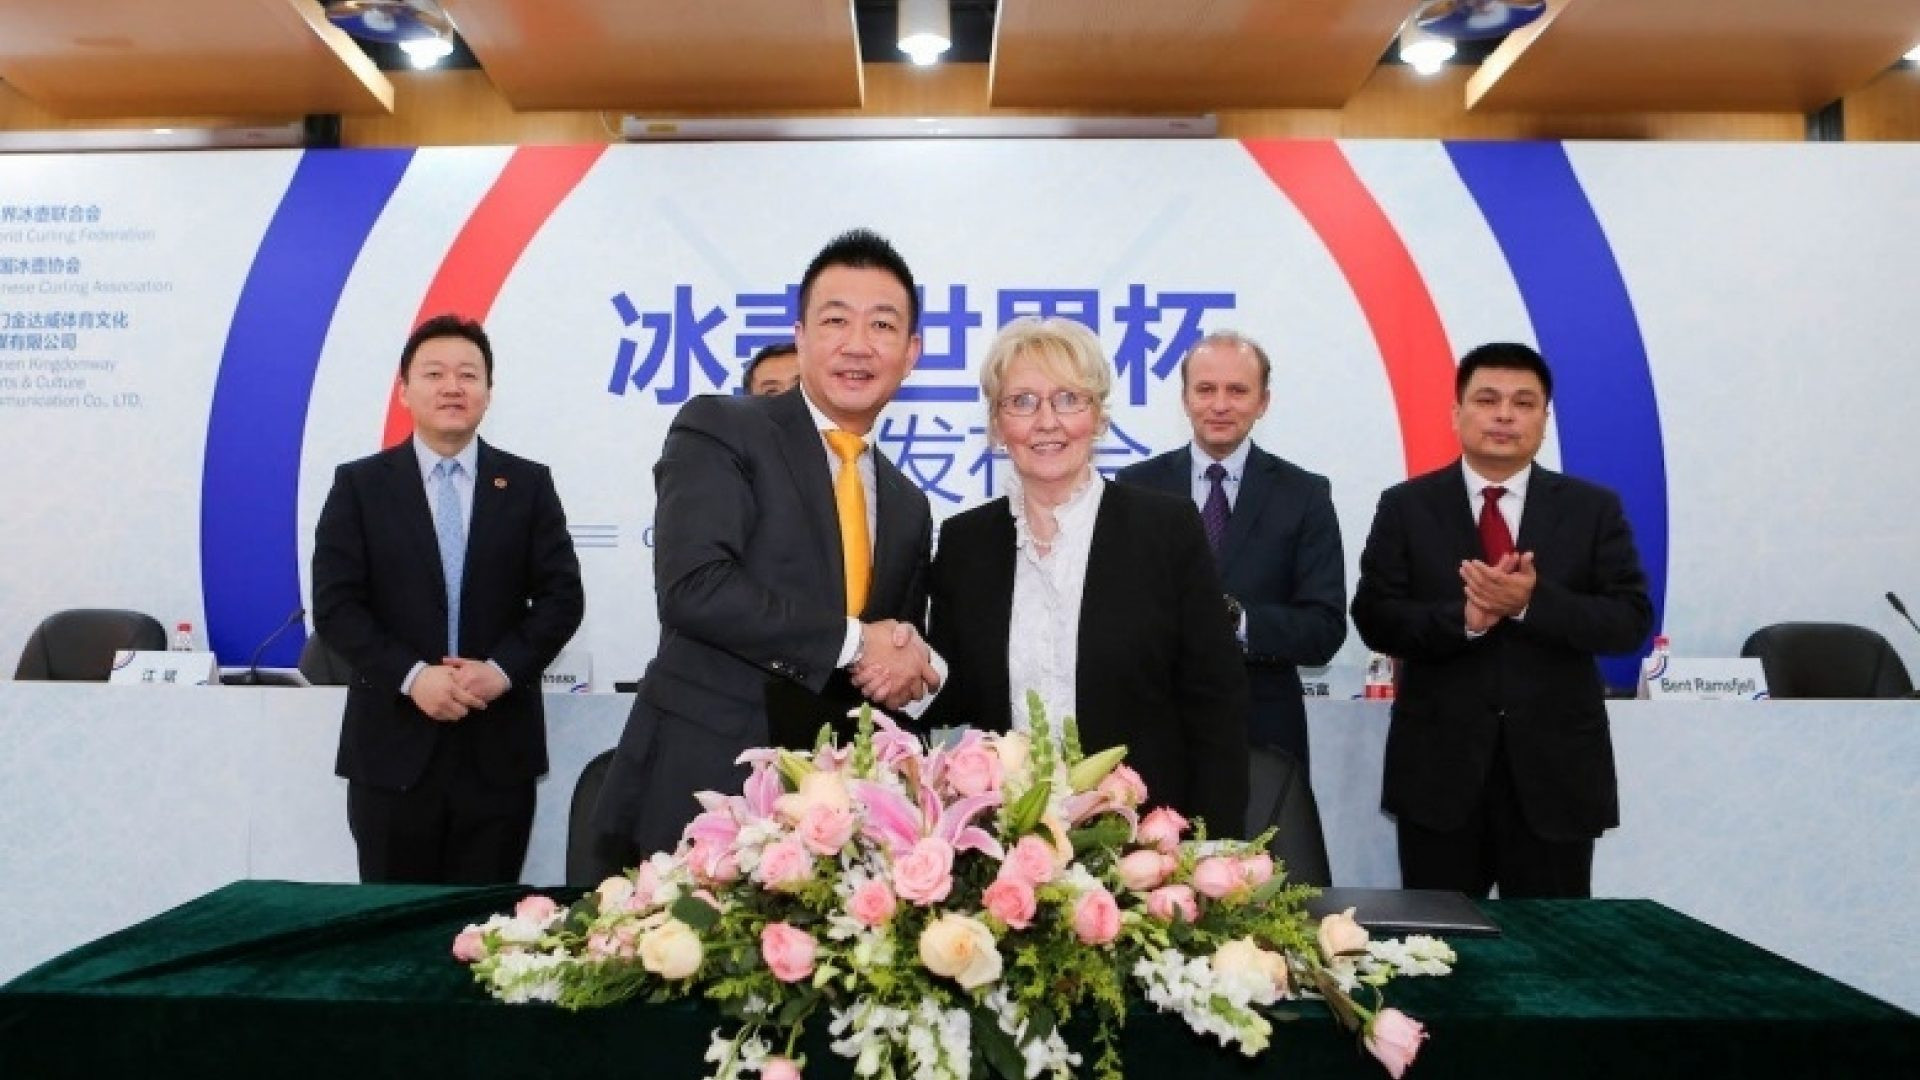 Jiang Bin, chief executive of the Kingdomway Group, left, signs the deal in May 2018 with World Curling Federation President Kate Caithness to launch the Curling World Cup ©WCF